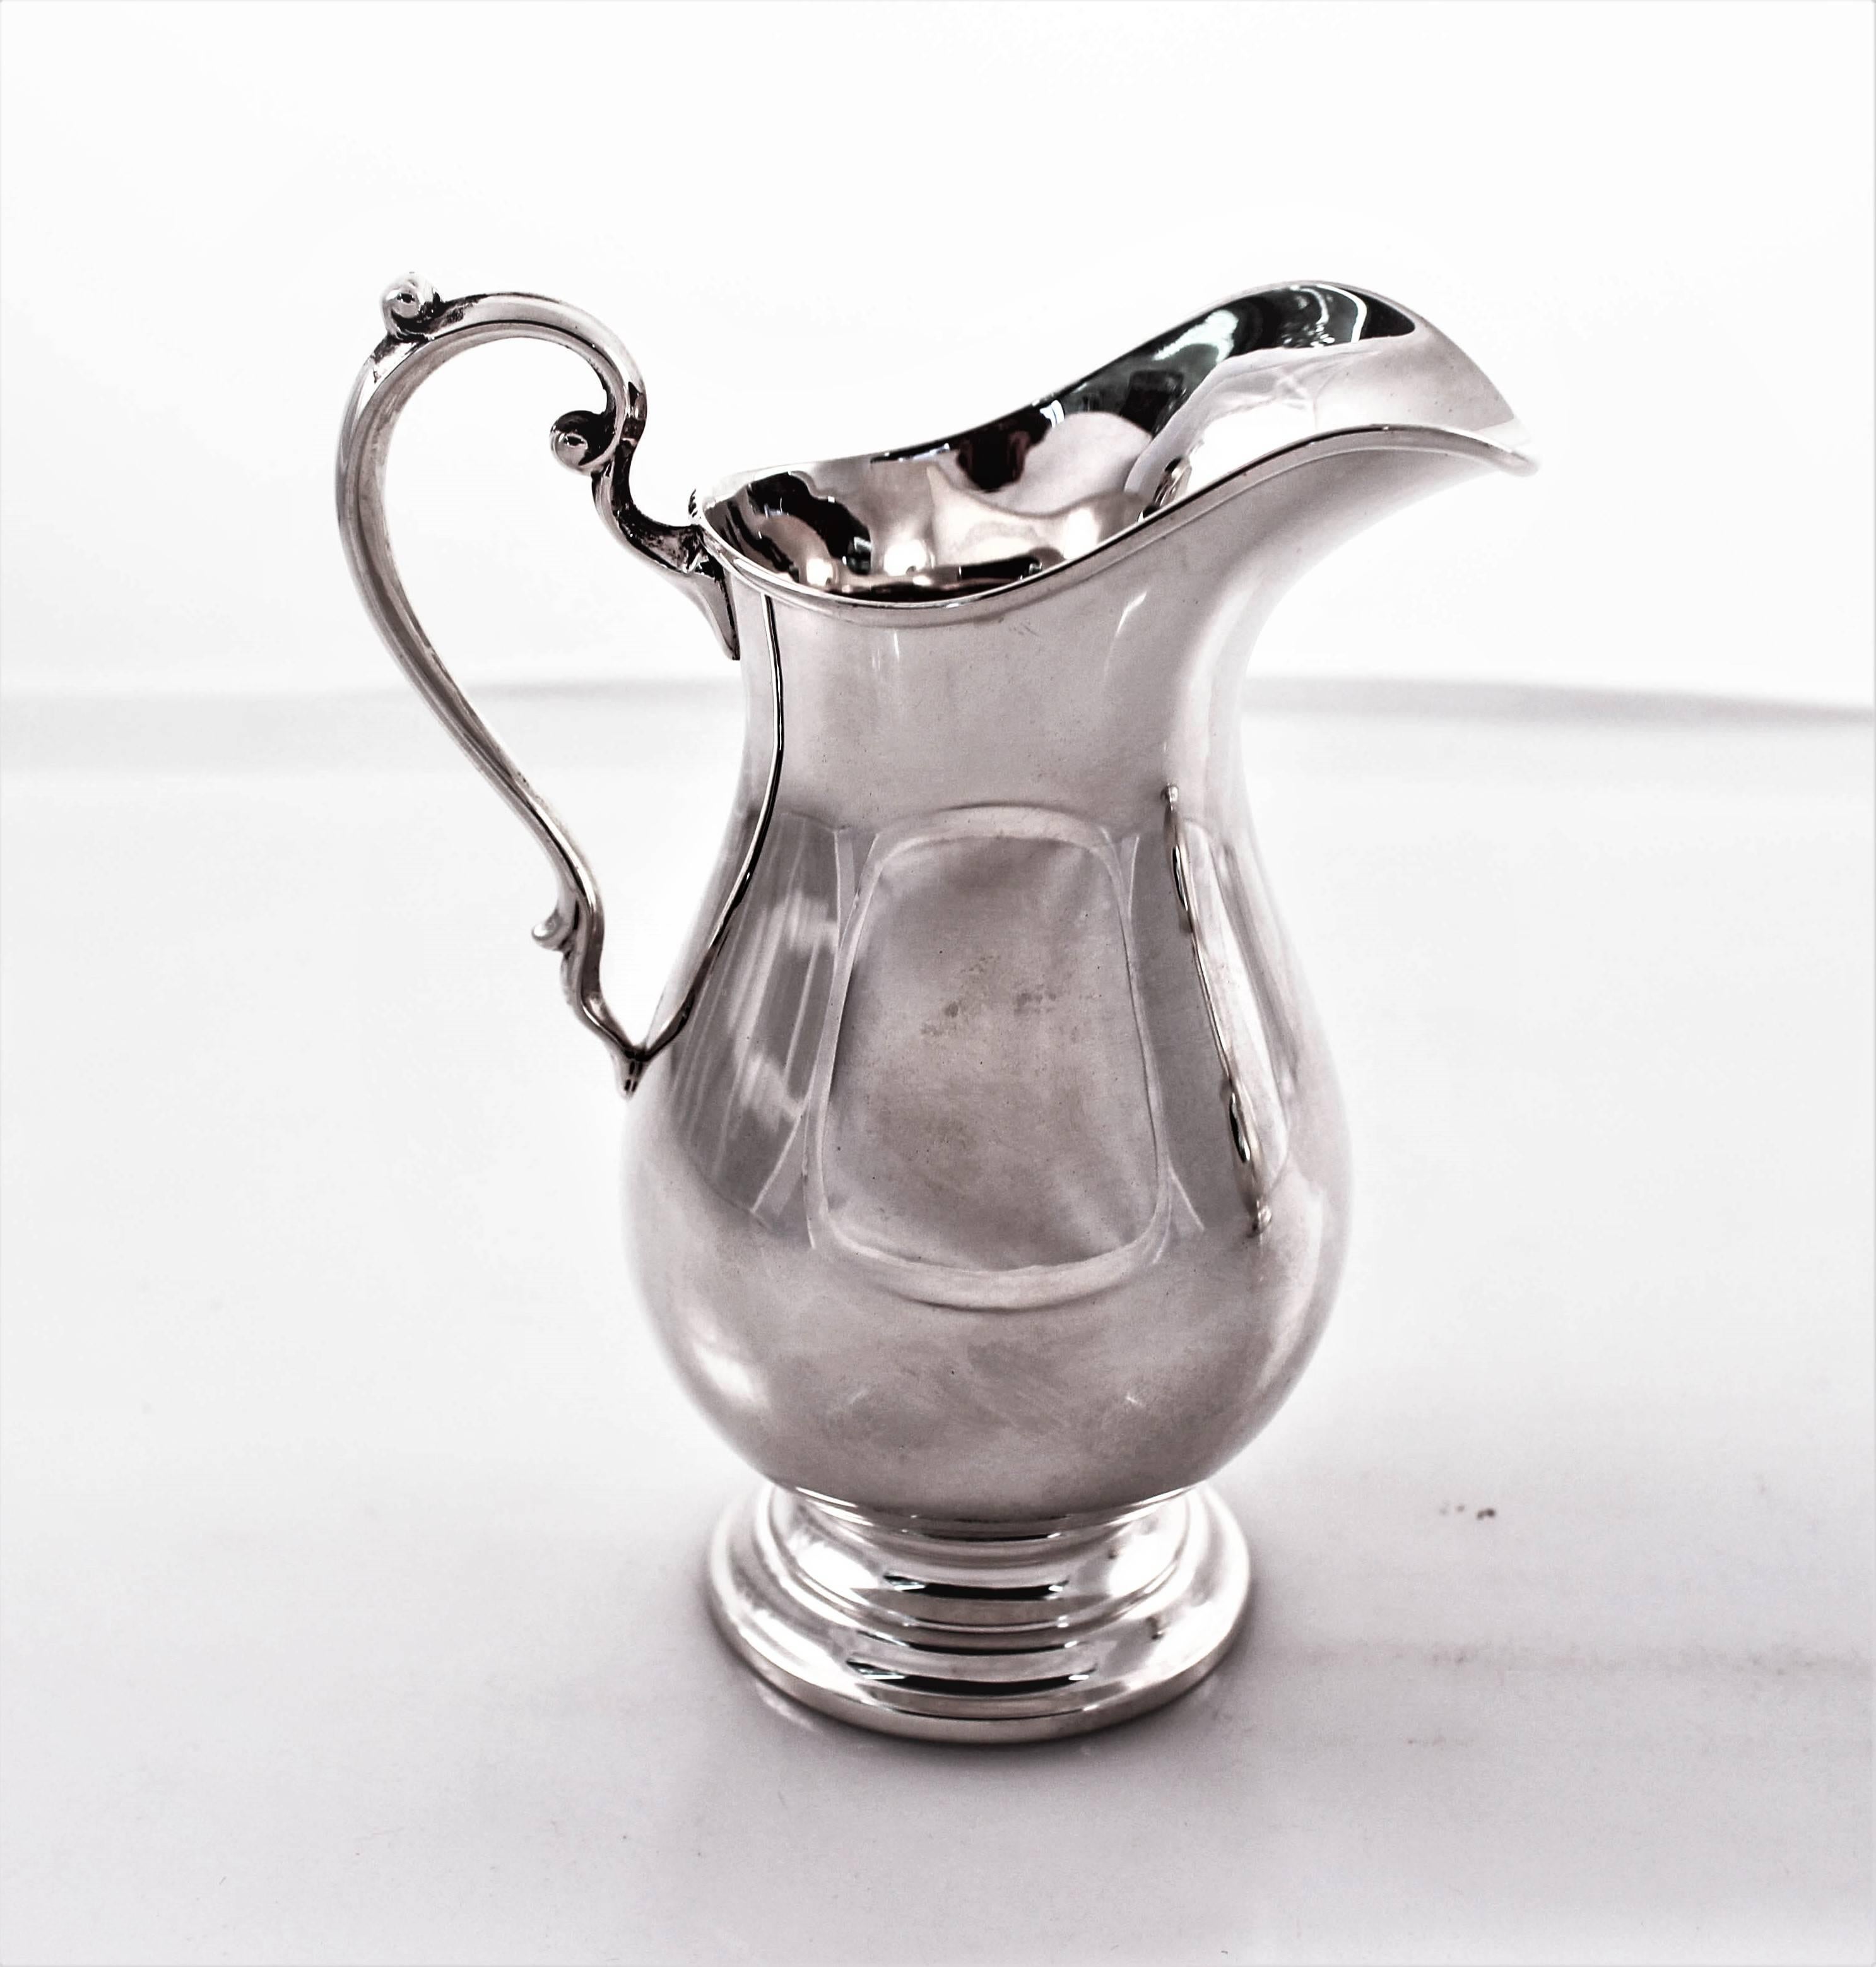 This cream and sugar bowl set will compliment any home decor or style. They have a Classic look that is timeless. The handles have a slight swirl to give a little design; the pieces themselves are without etching or pattern. Reflective of the late